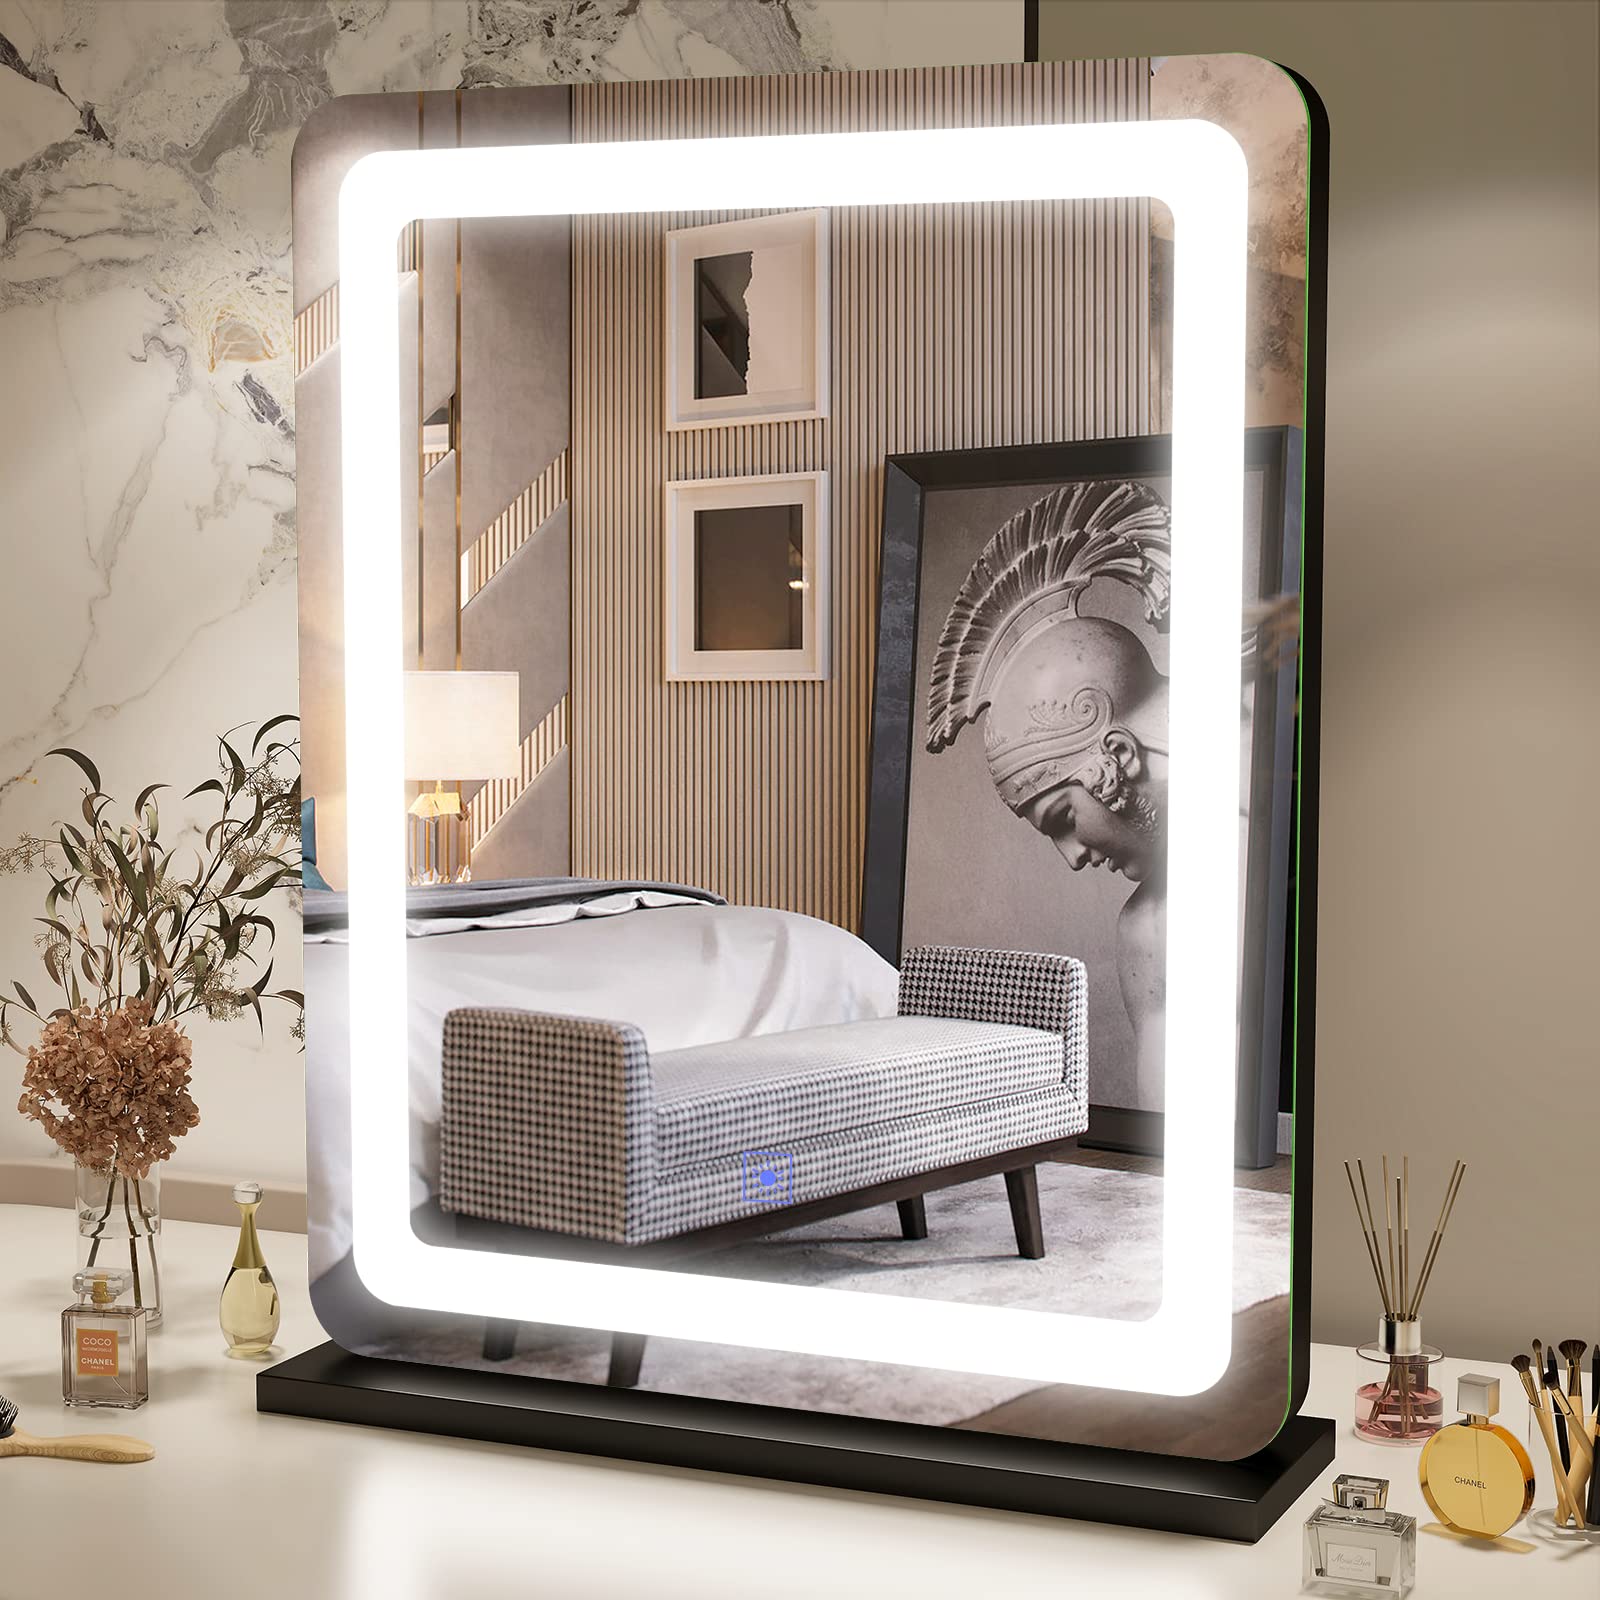 Buy FENNIO Vanity Mirror with Lights 19x22 - LED Lighted Makeup Mirror, Large Makeup Mirror with Lights,Touch Screen with 3-Color Lighting,Led  Mirror Makeup,Dimmable, for Vanity Desk Tabletop, Bedroom